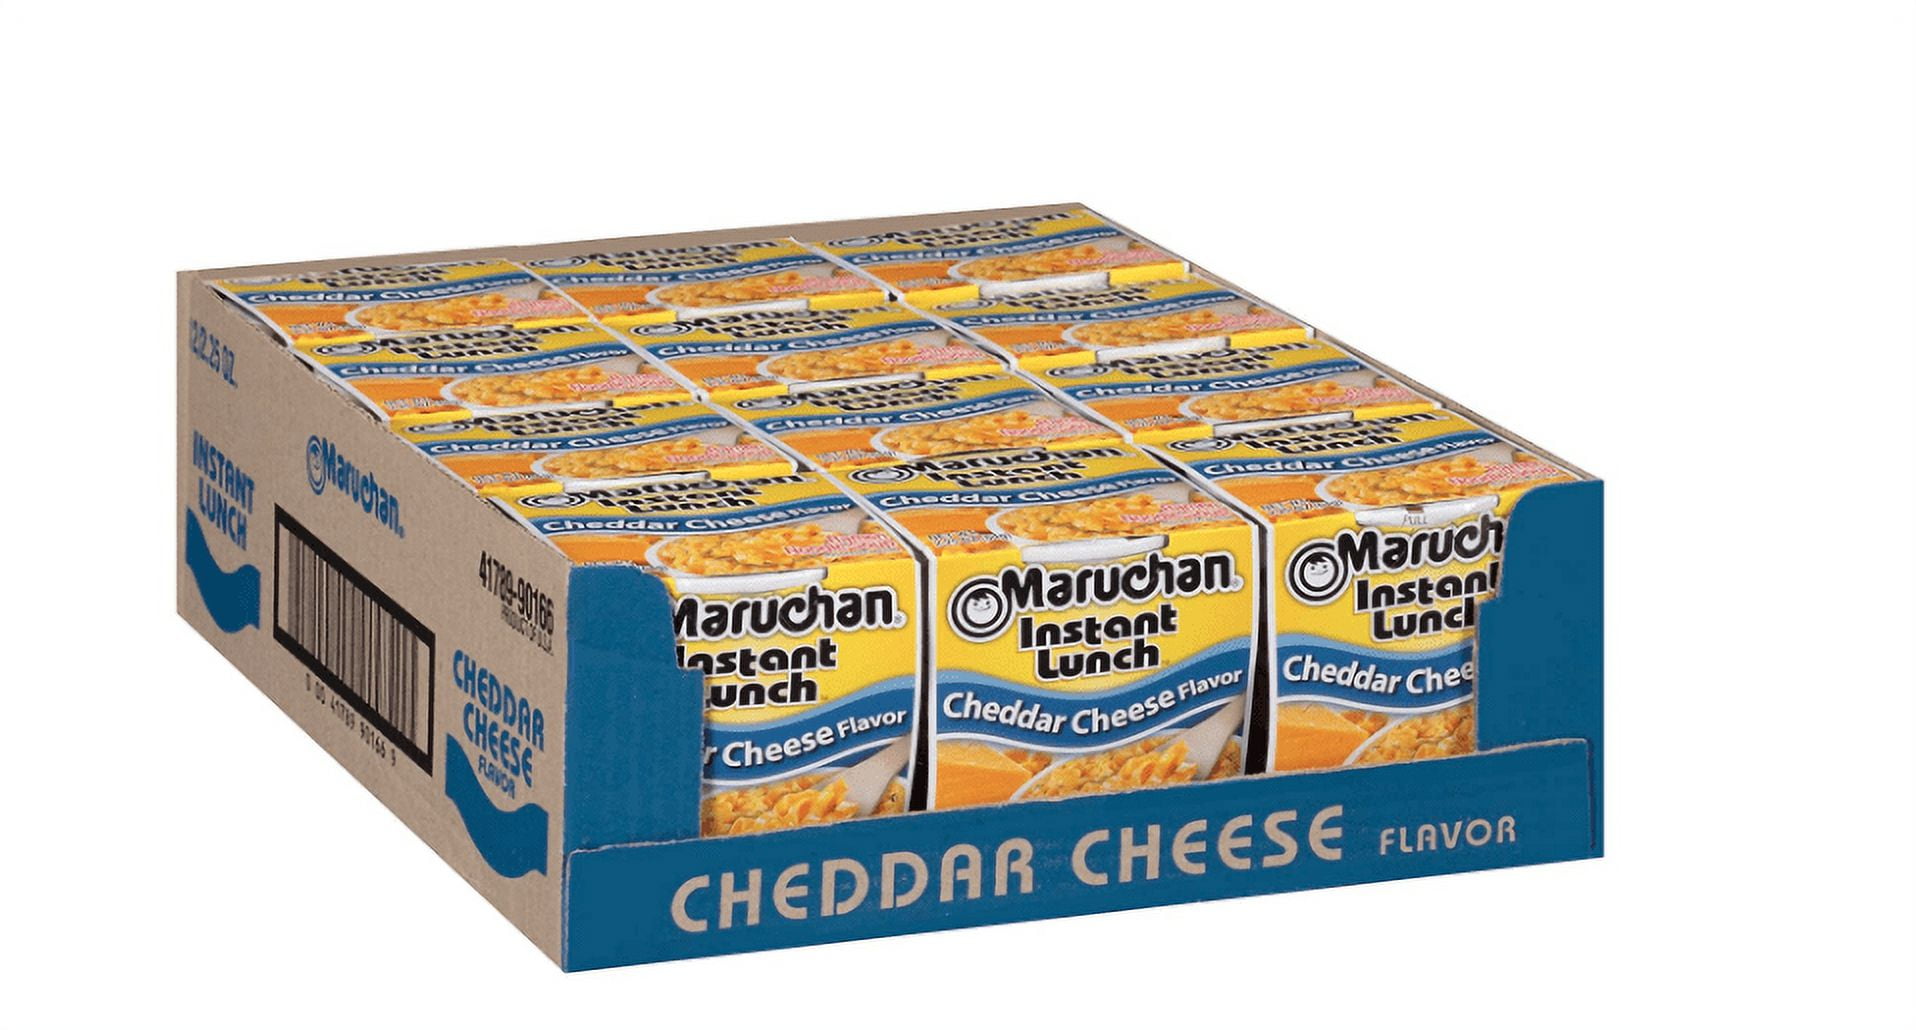 Maruchan Instant Lunch Cheddar Cheese Flavored Ramen Noodle Soup, 2.25 oz  Shelf Stable Cup